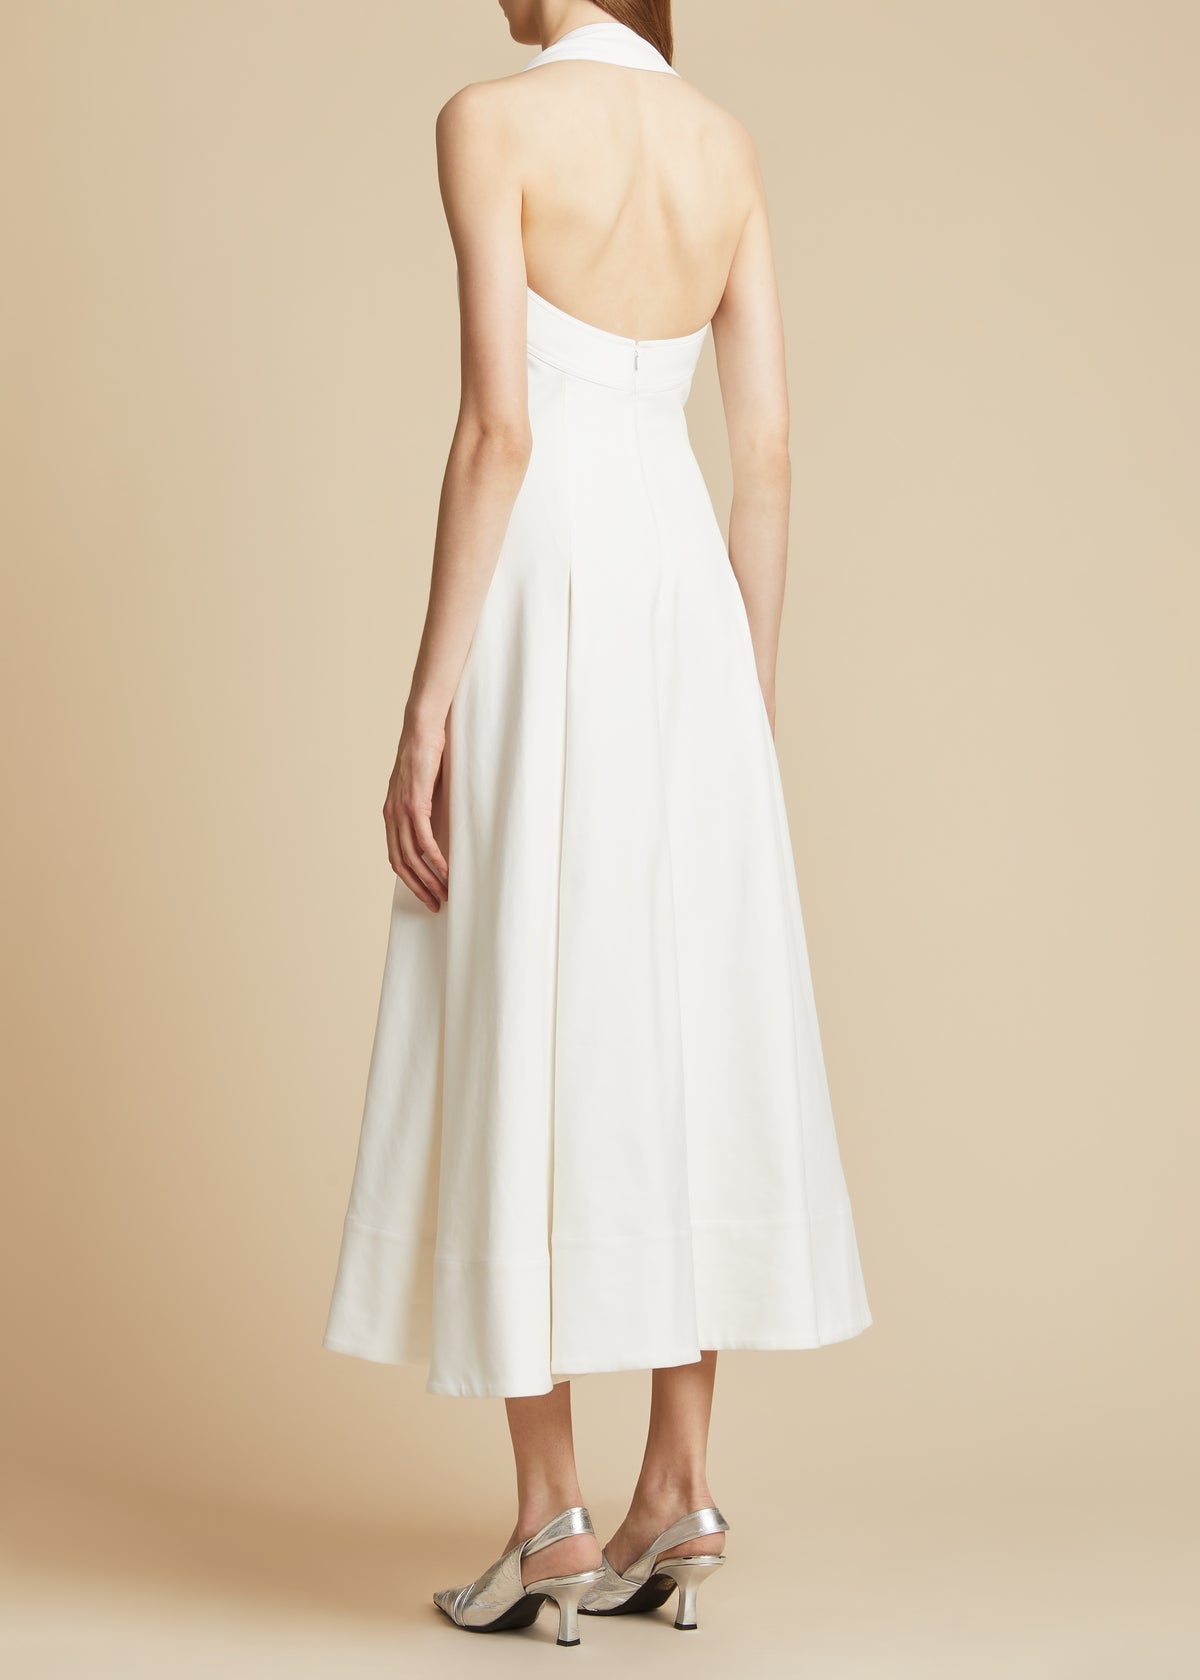 The Lalita Dress in White - 3